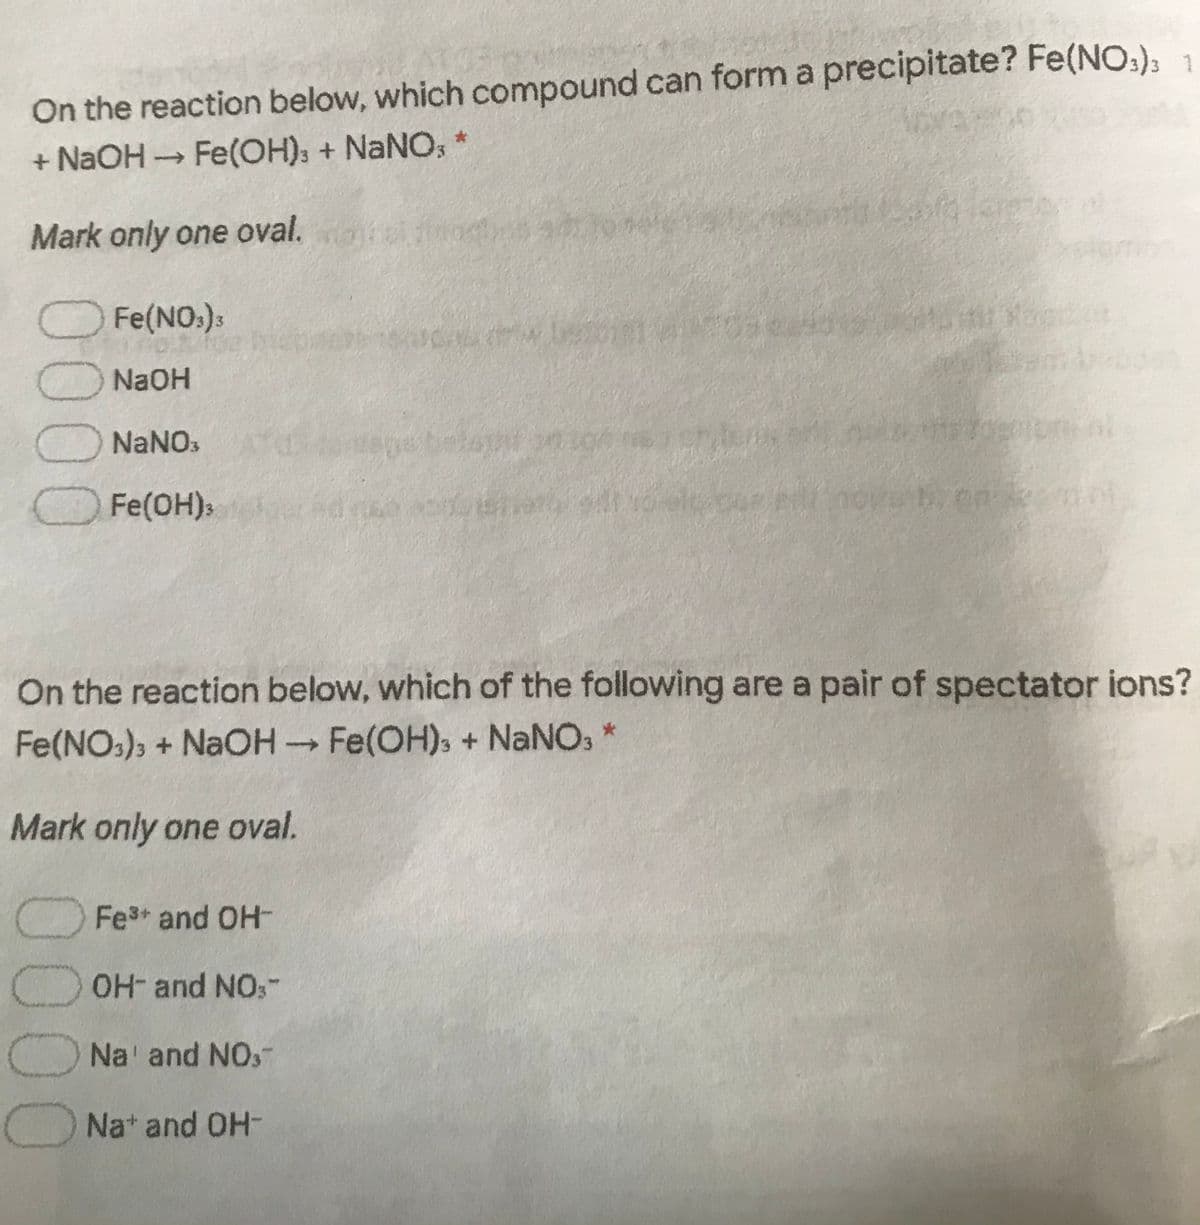 On the reaction below, which compound can form a precipitate? Fe(NO:); 1
+ NaOH Fe(OH); + NaNO, *
Mark only one oval.
O Fe(NO:):
ONaOH
O NaNOs
belant
O Fe(OH)s
On the reaction below, which of the following are a pair of spectator ions?
Fe(NO:), + NaOH Fe(OH), + NaNO:
->
Mark only one oval.
OFe3+ and OH-
OH- and NO,-
ONa' and NO,-
ONa* and OH-
